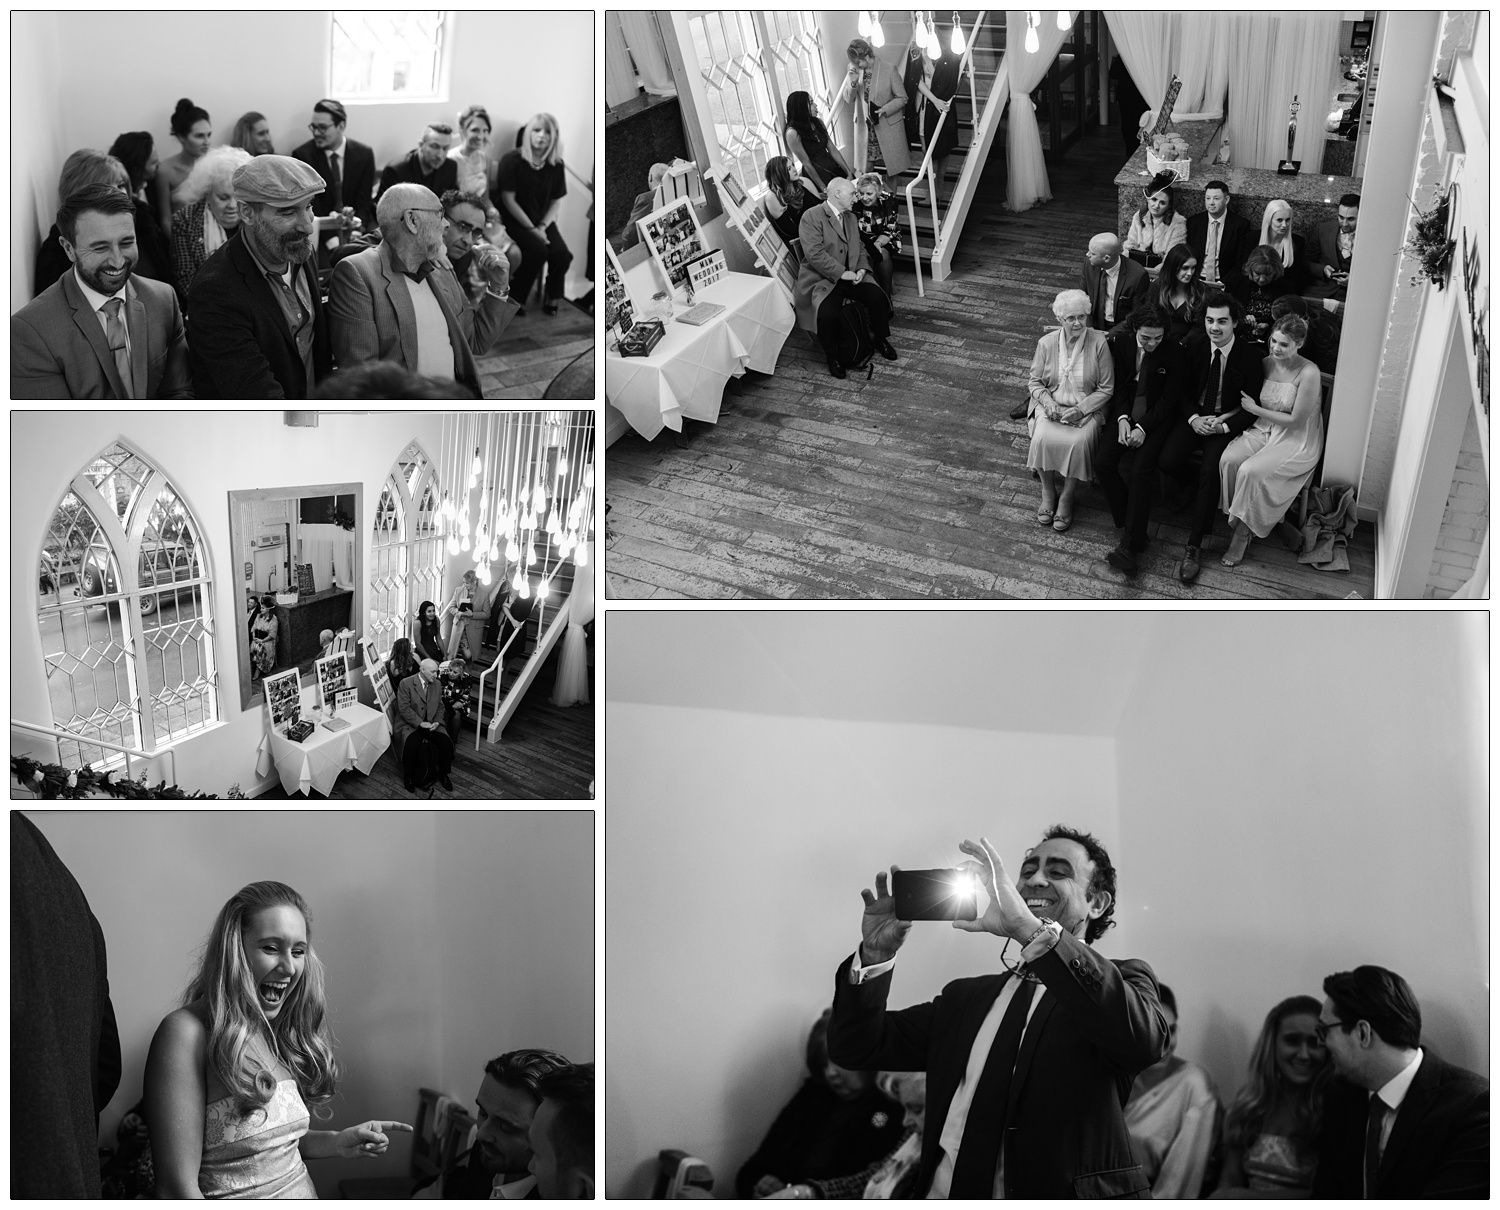 Black and white photographs at an Essex wedding in the winter. A man is taking a photo with a phone and the flash goes off. A man sitting down watching the ceremony is wearing a flat cap.